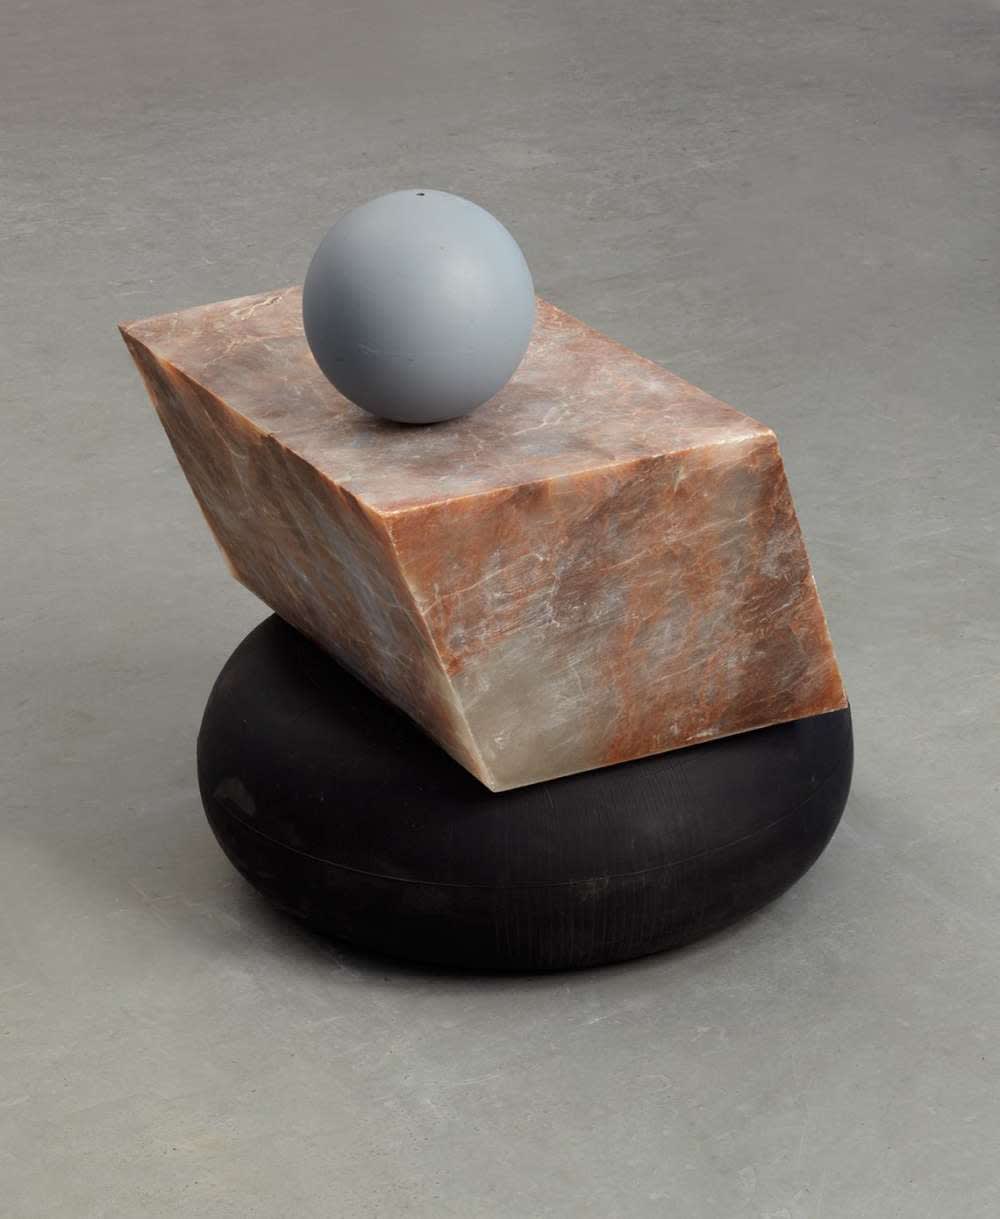 Alison Wilding Bedrocked, 2013 Alabaster, cast silicone rubber, acrylic and sand 68 x 57 x 54 cm | 26 3/4 x 22 1/2 x 21 1/4 in